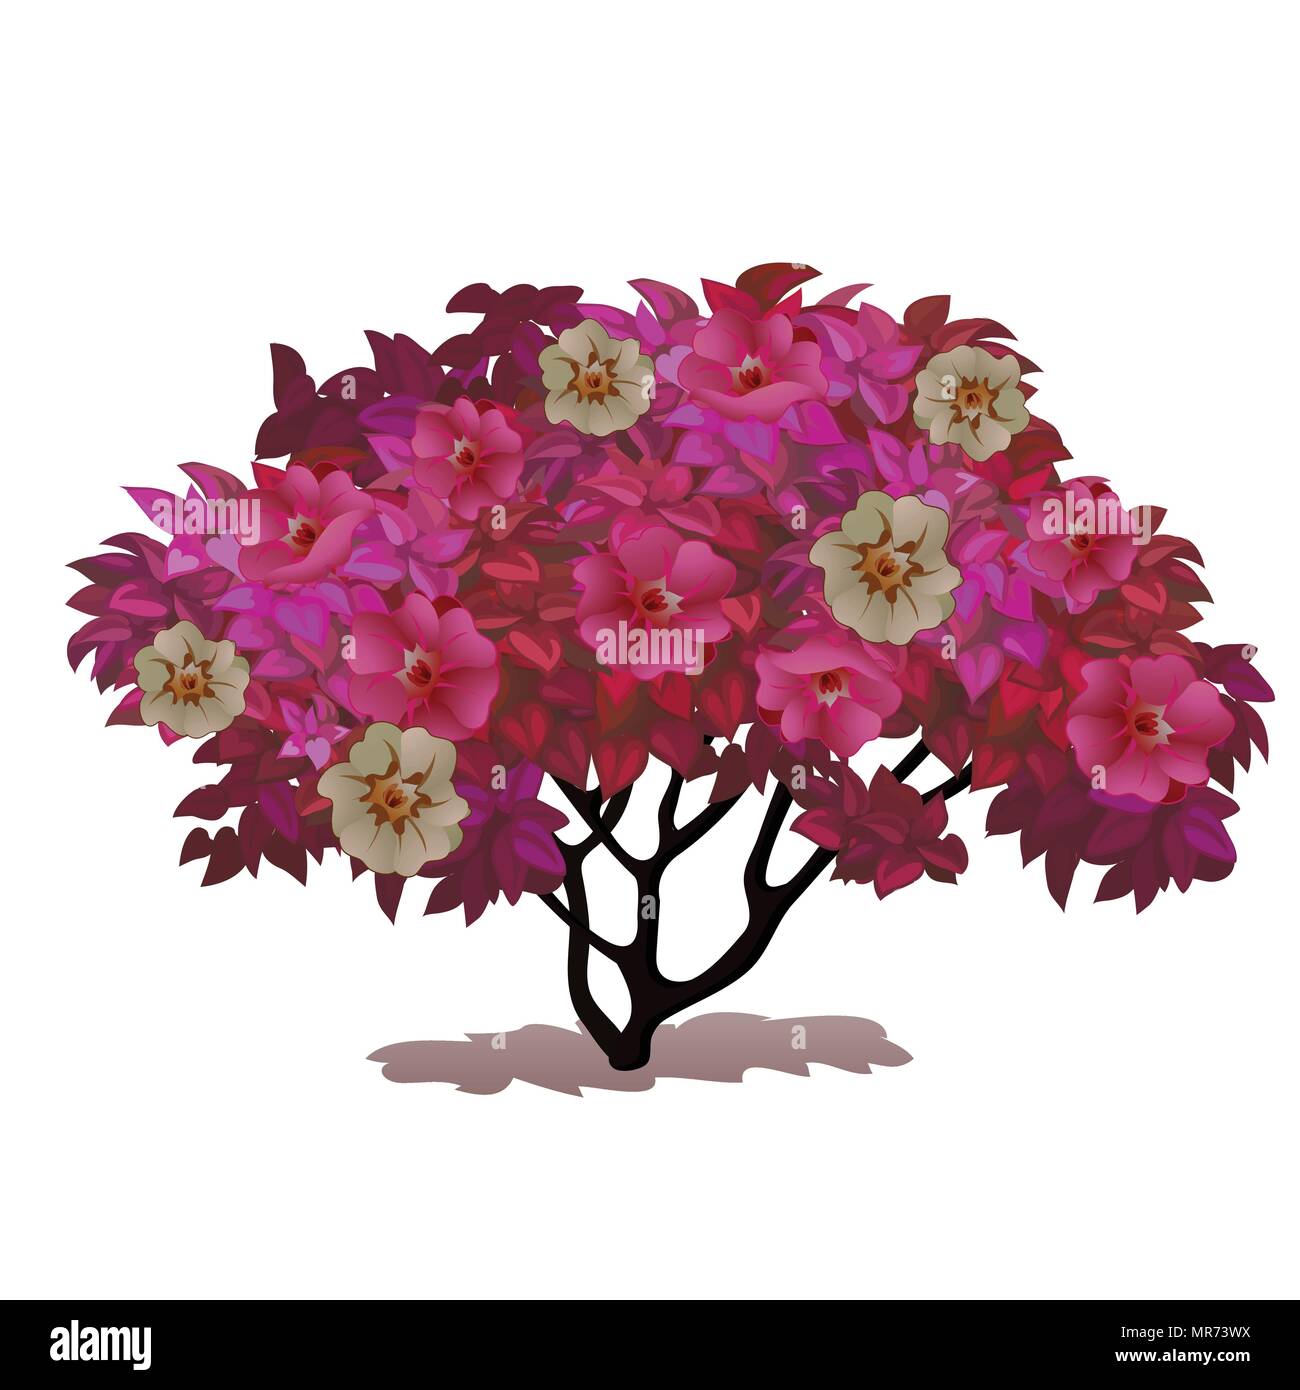 Fancy a Bush covered with flowers. Fantasy nature. Vector illustration. Stock Vector